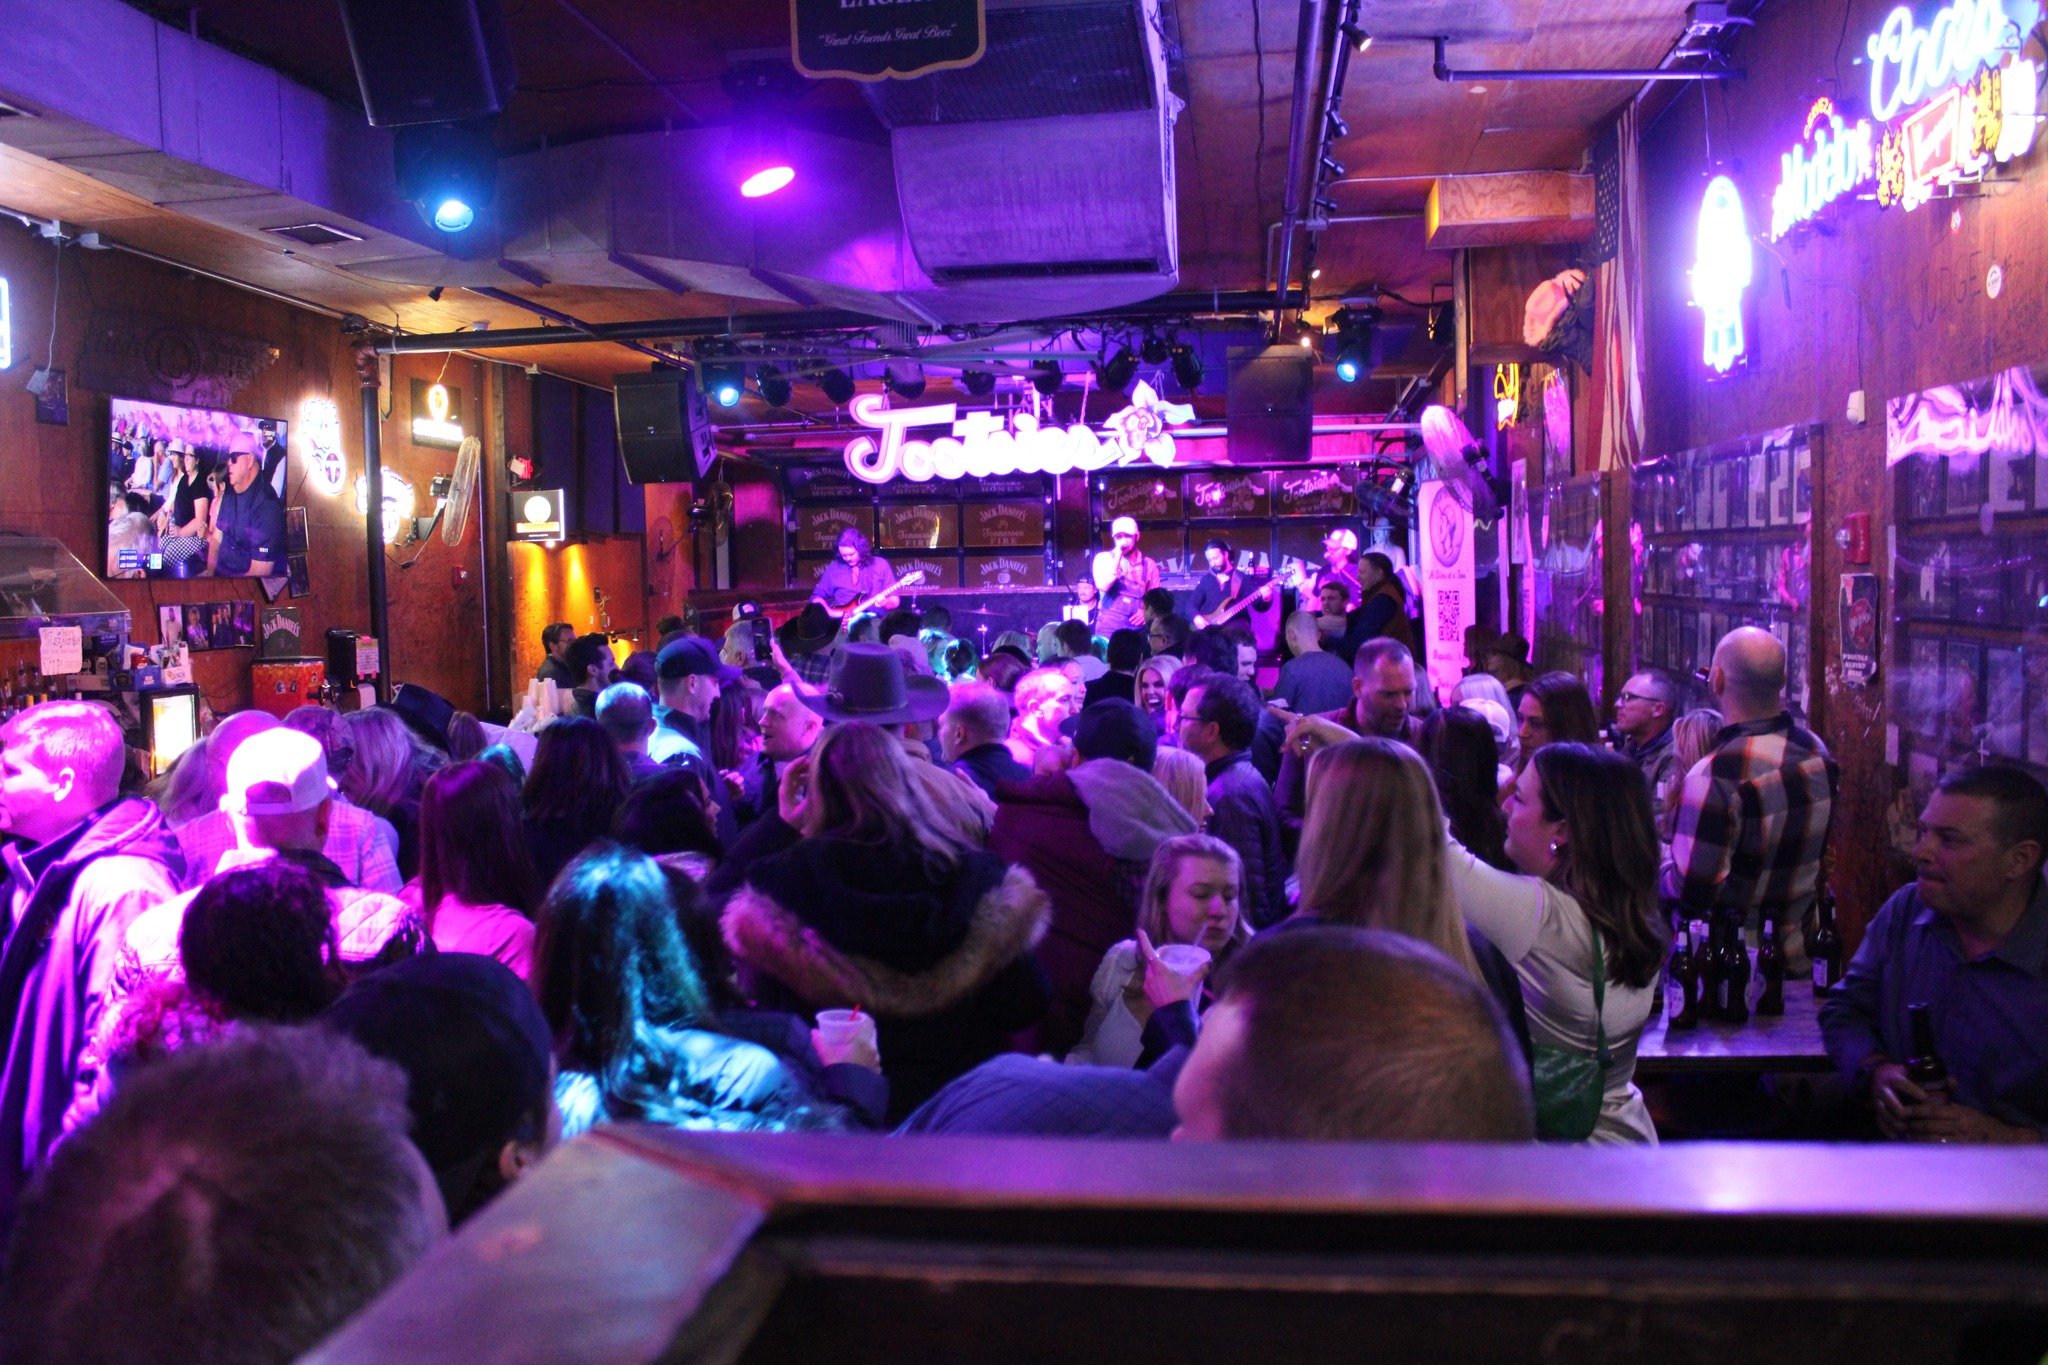 The 3rd floor is the biggest and newest floor at Tootsie's. It's a great place to party, but the lower floors have more history.  Which is your favorite floor?  #tootsiesworldfamousorchidlounge #tootsies #musiccity #worldfamous #tootsiesrooftop